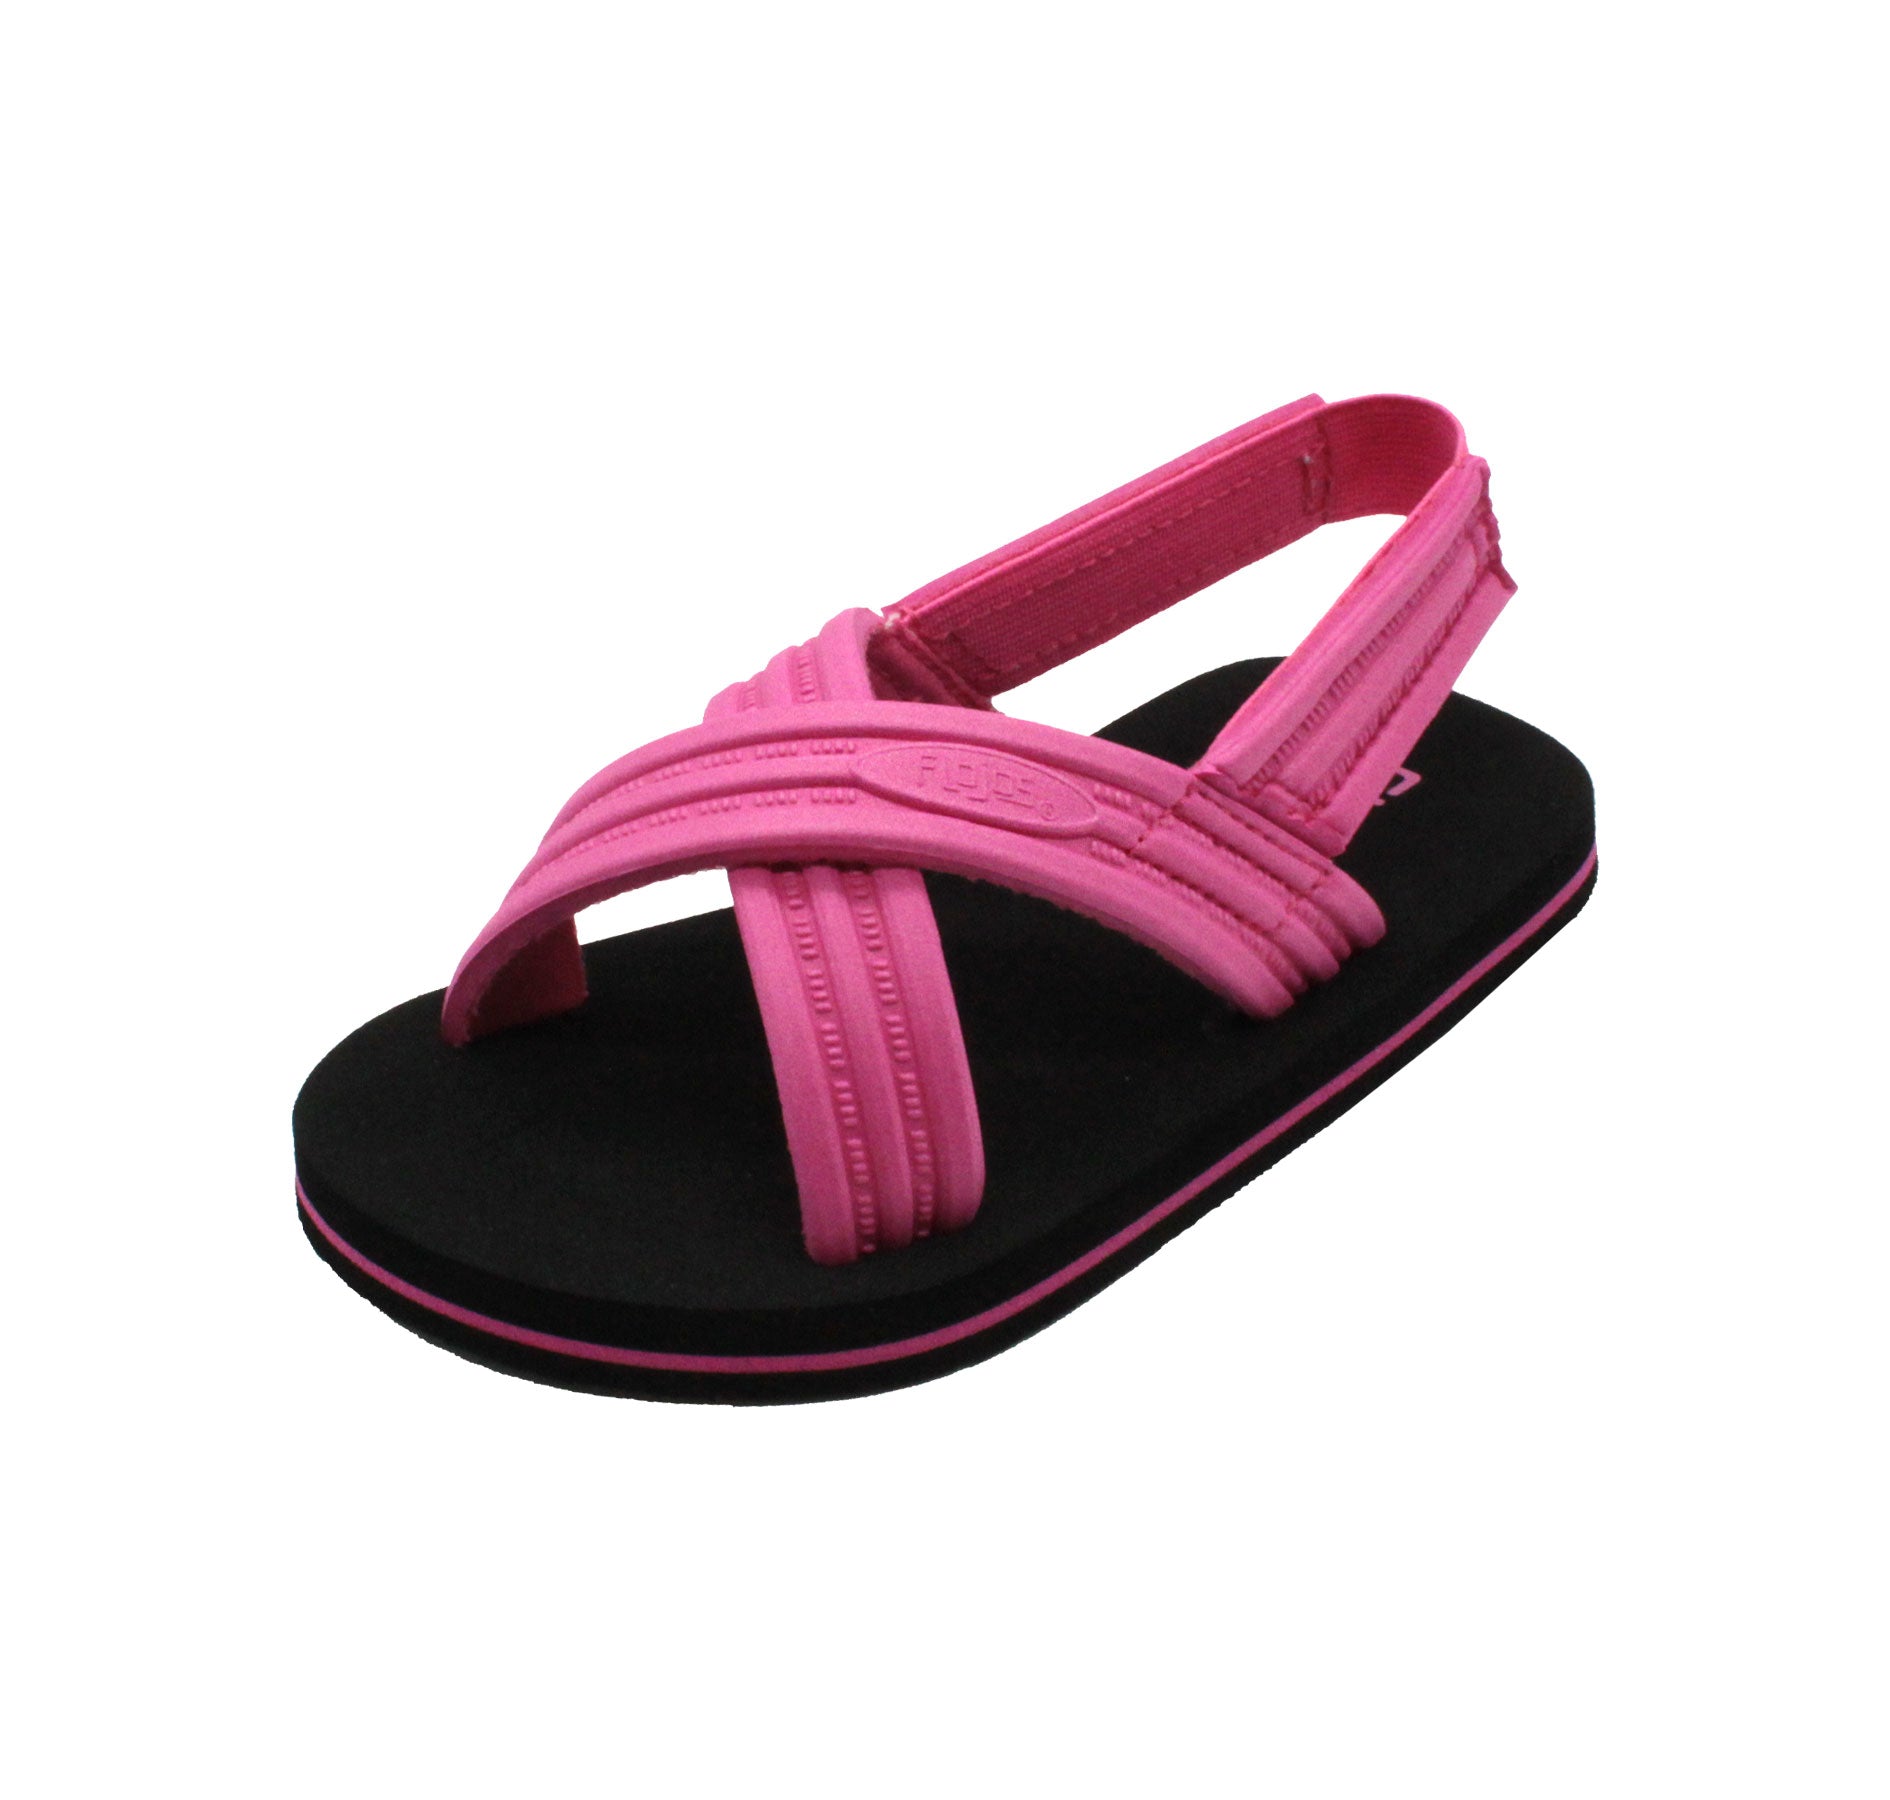 Princess Roman Infant Sandals For Baby Girls Soft Bottom, Sizes 21 30,  Ideal For Summer From Angel_childhood, $12.46 | DHgate.Com